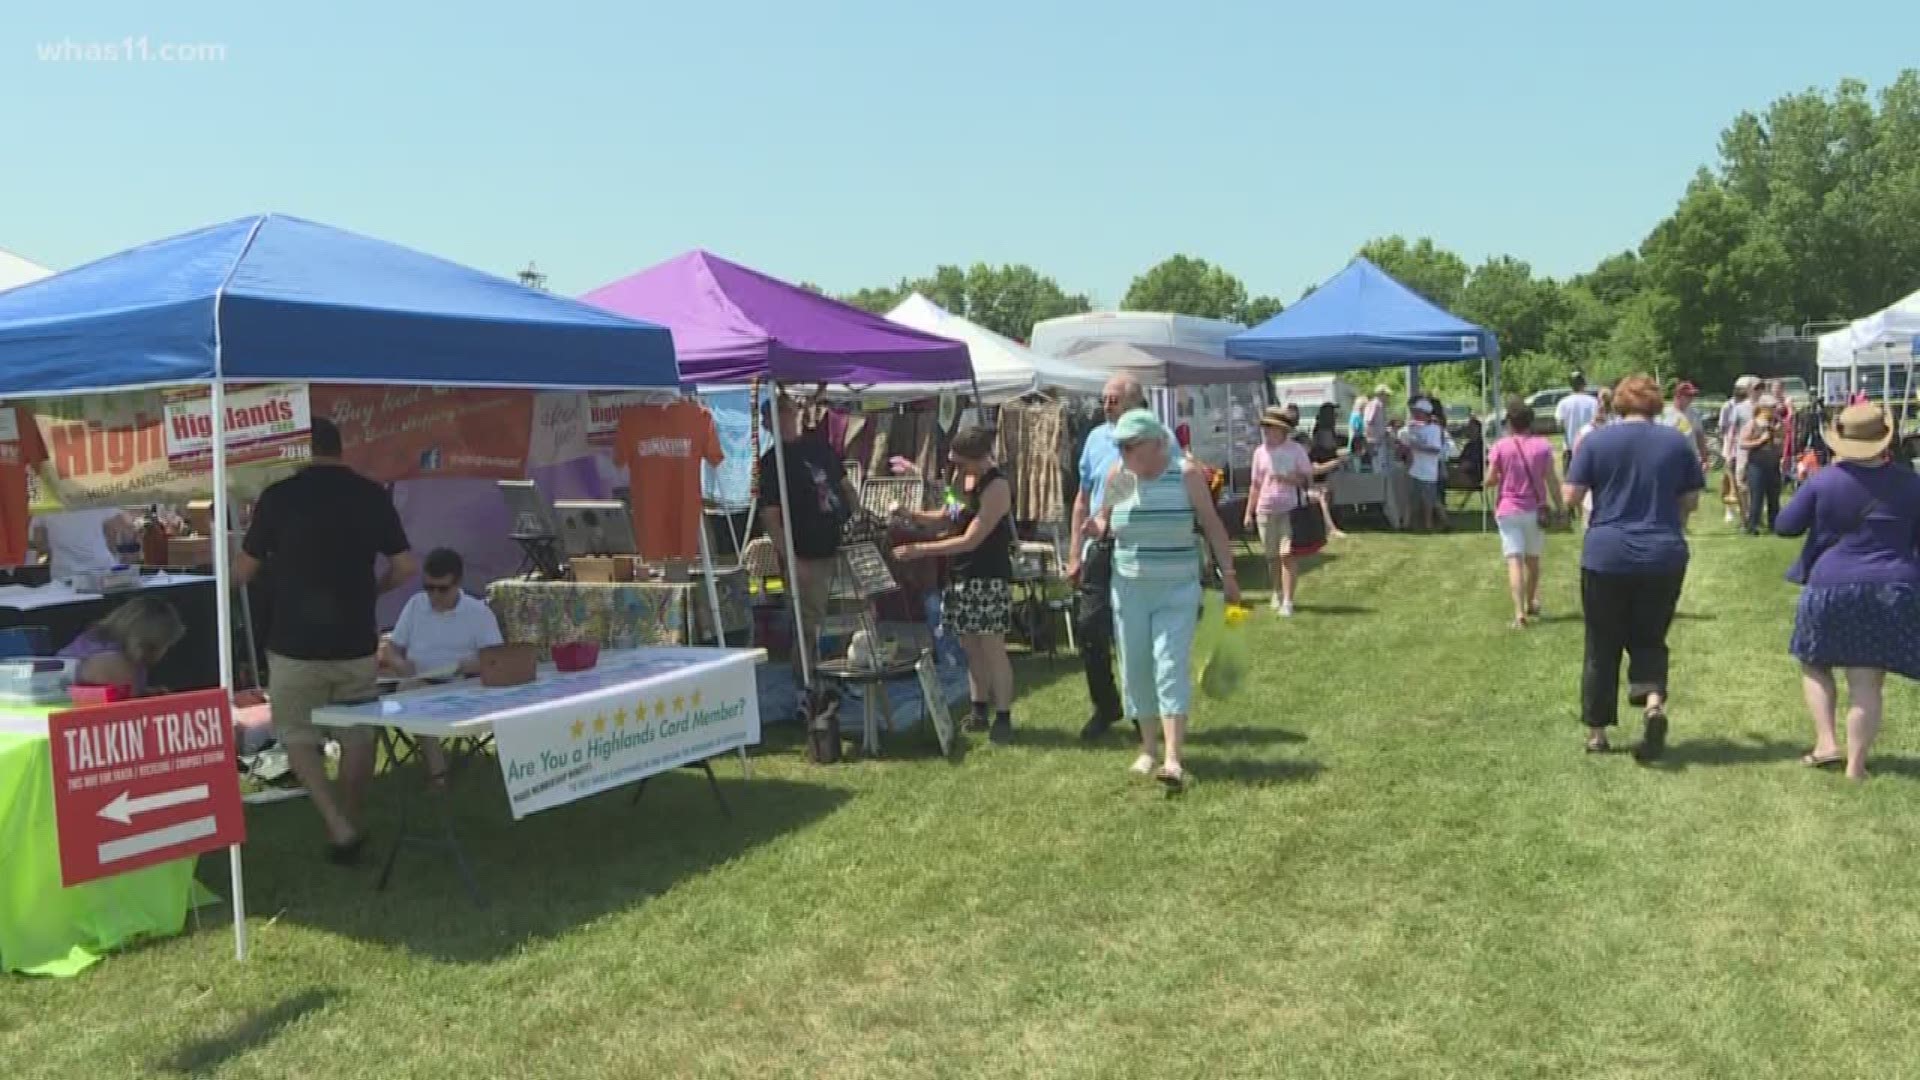 The Louisville Independent Business Alliance put together a local fair to promote local businesses